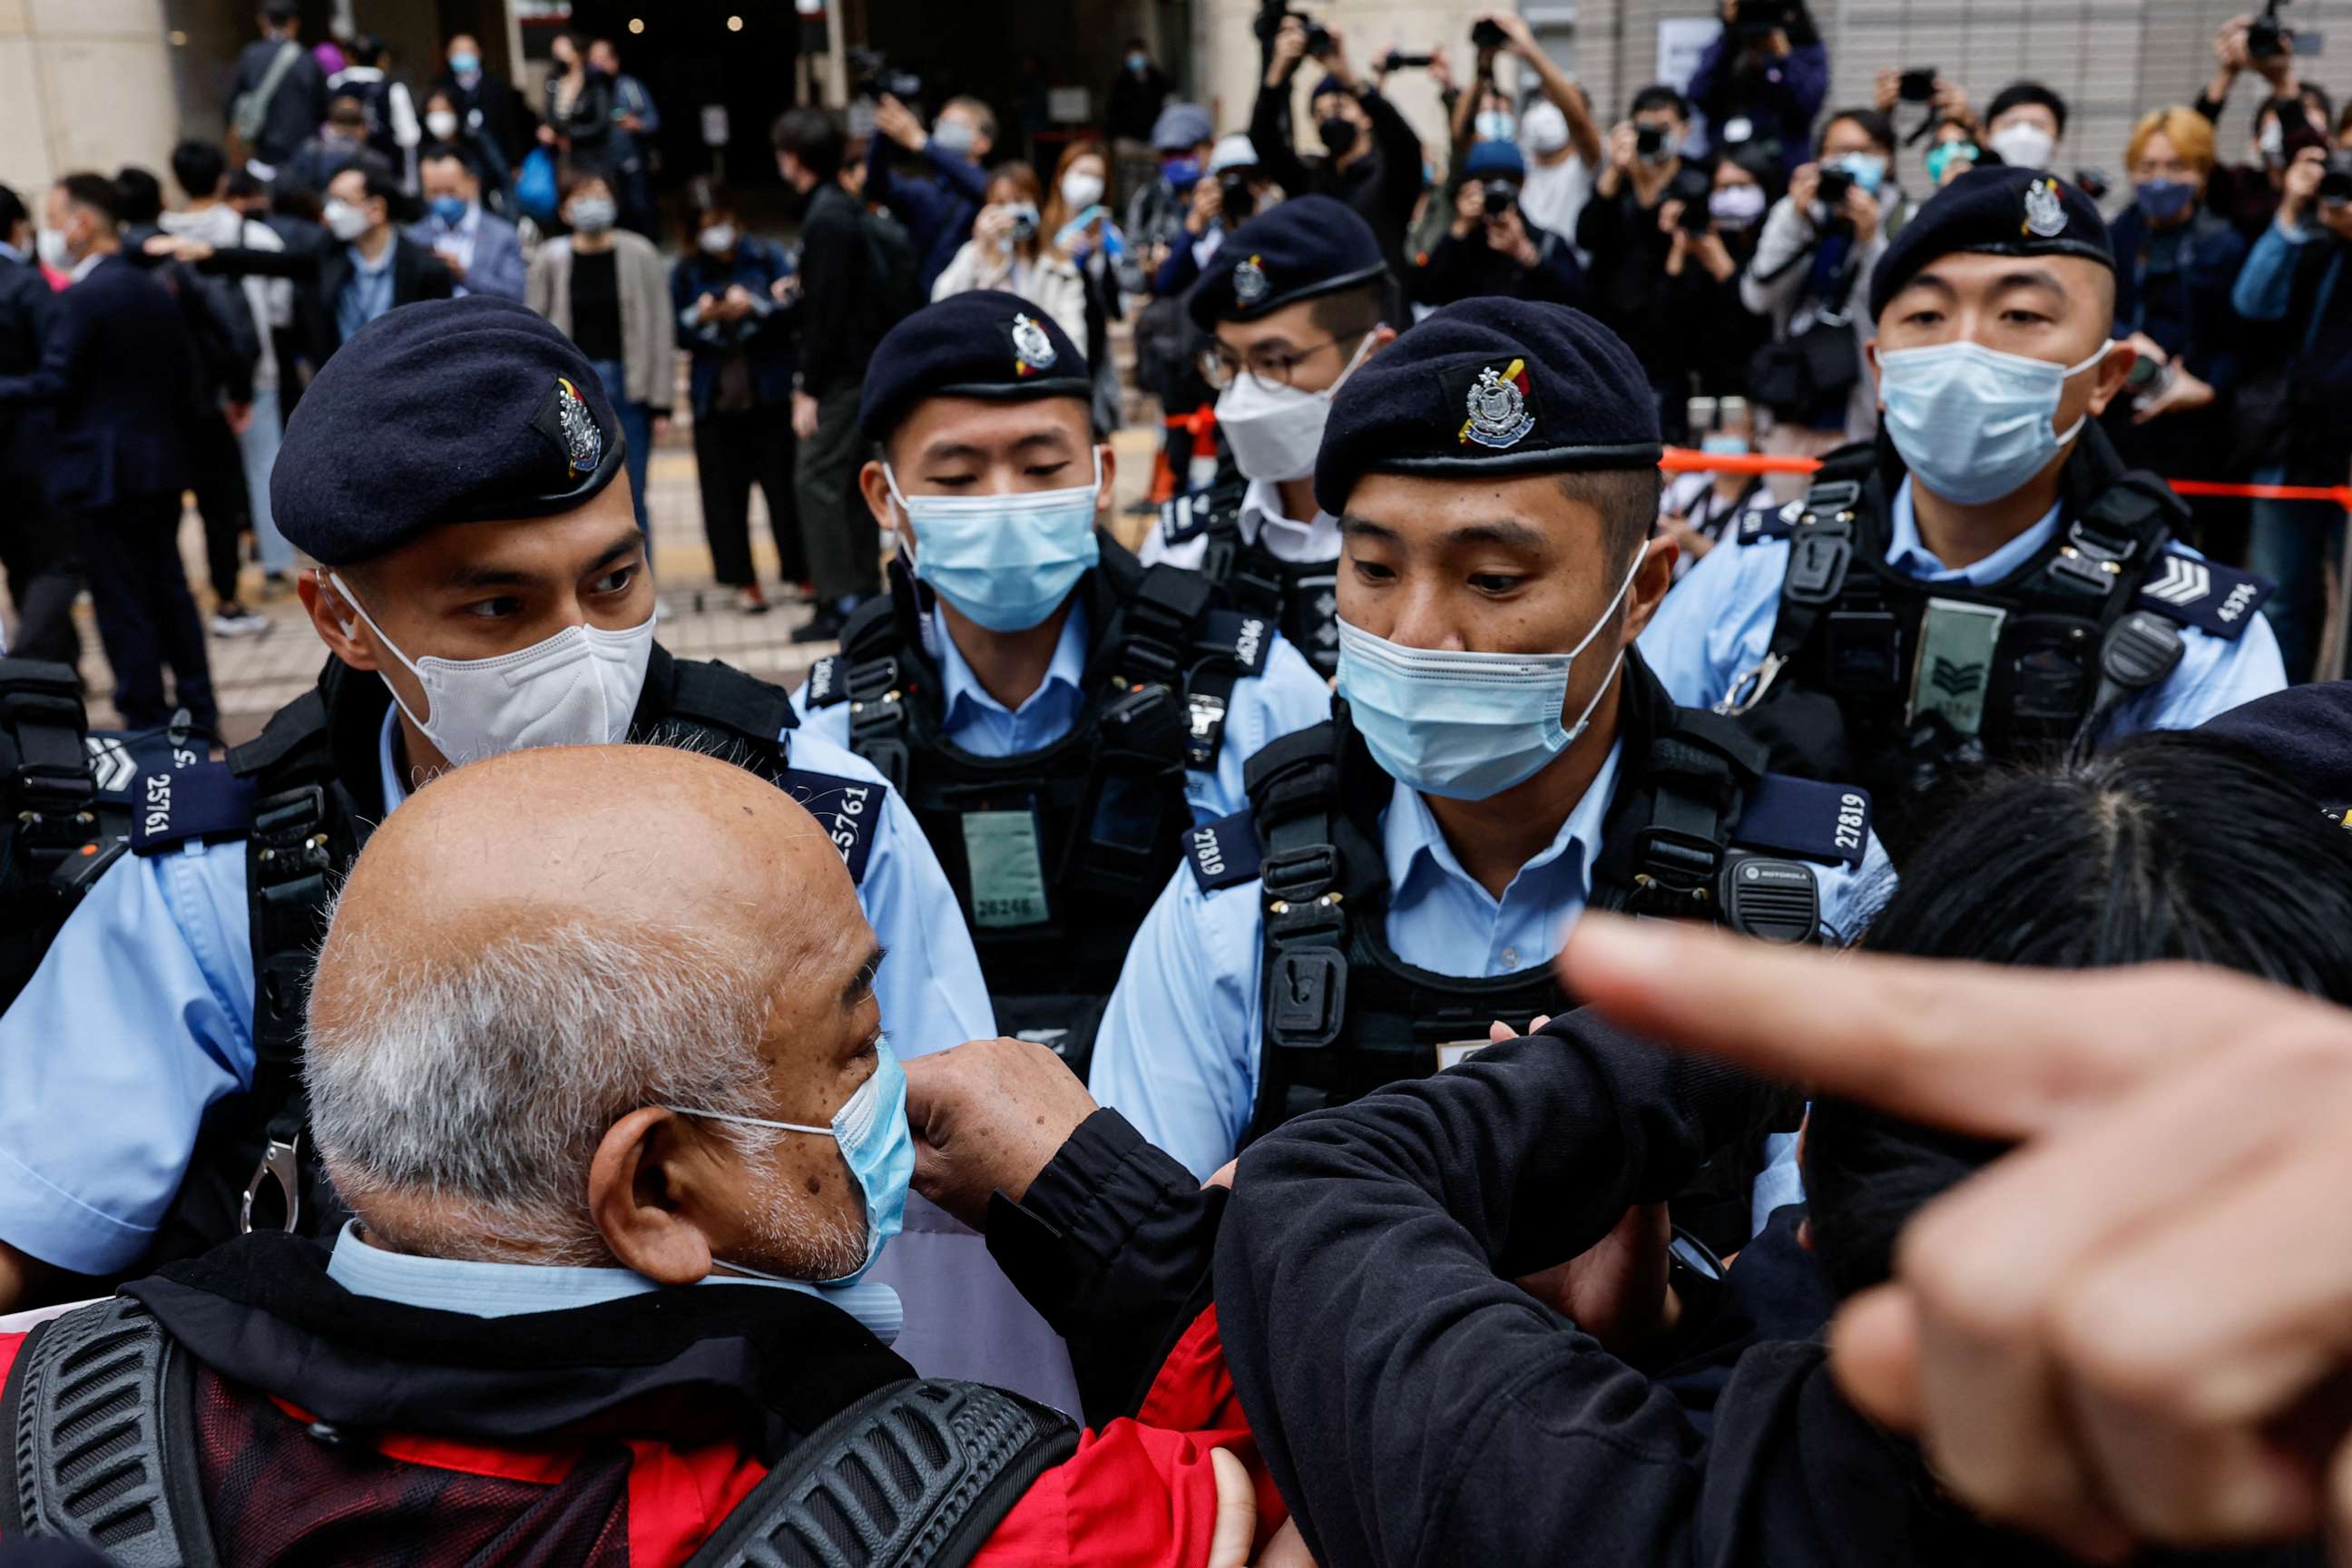 PHOTO: Supporters are surrounded by police outside the West Kowloon Magistrates' Courts building during the hearing of the 47 pro-democracy activists charged with conspiracy to commit subversion under the national security law, in Hong Kong, Feb. 6, 2023.